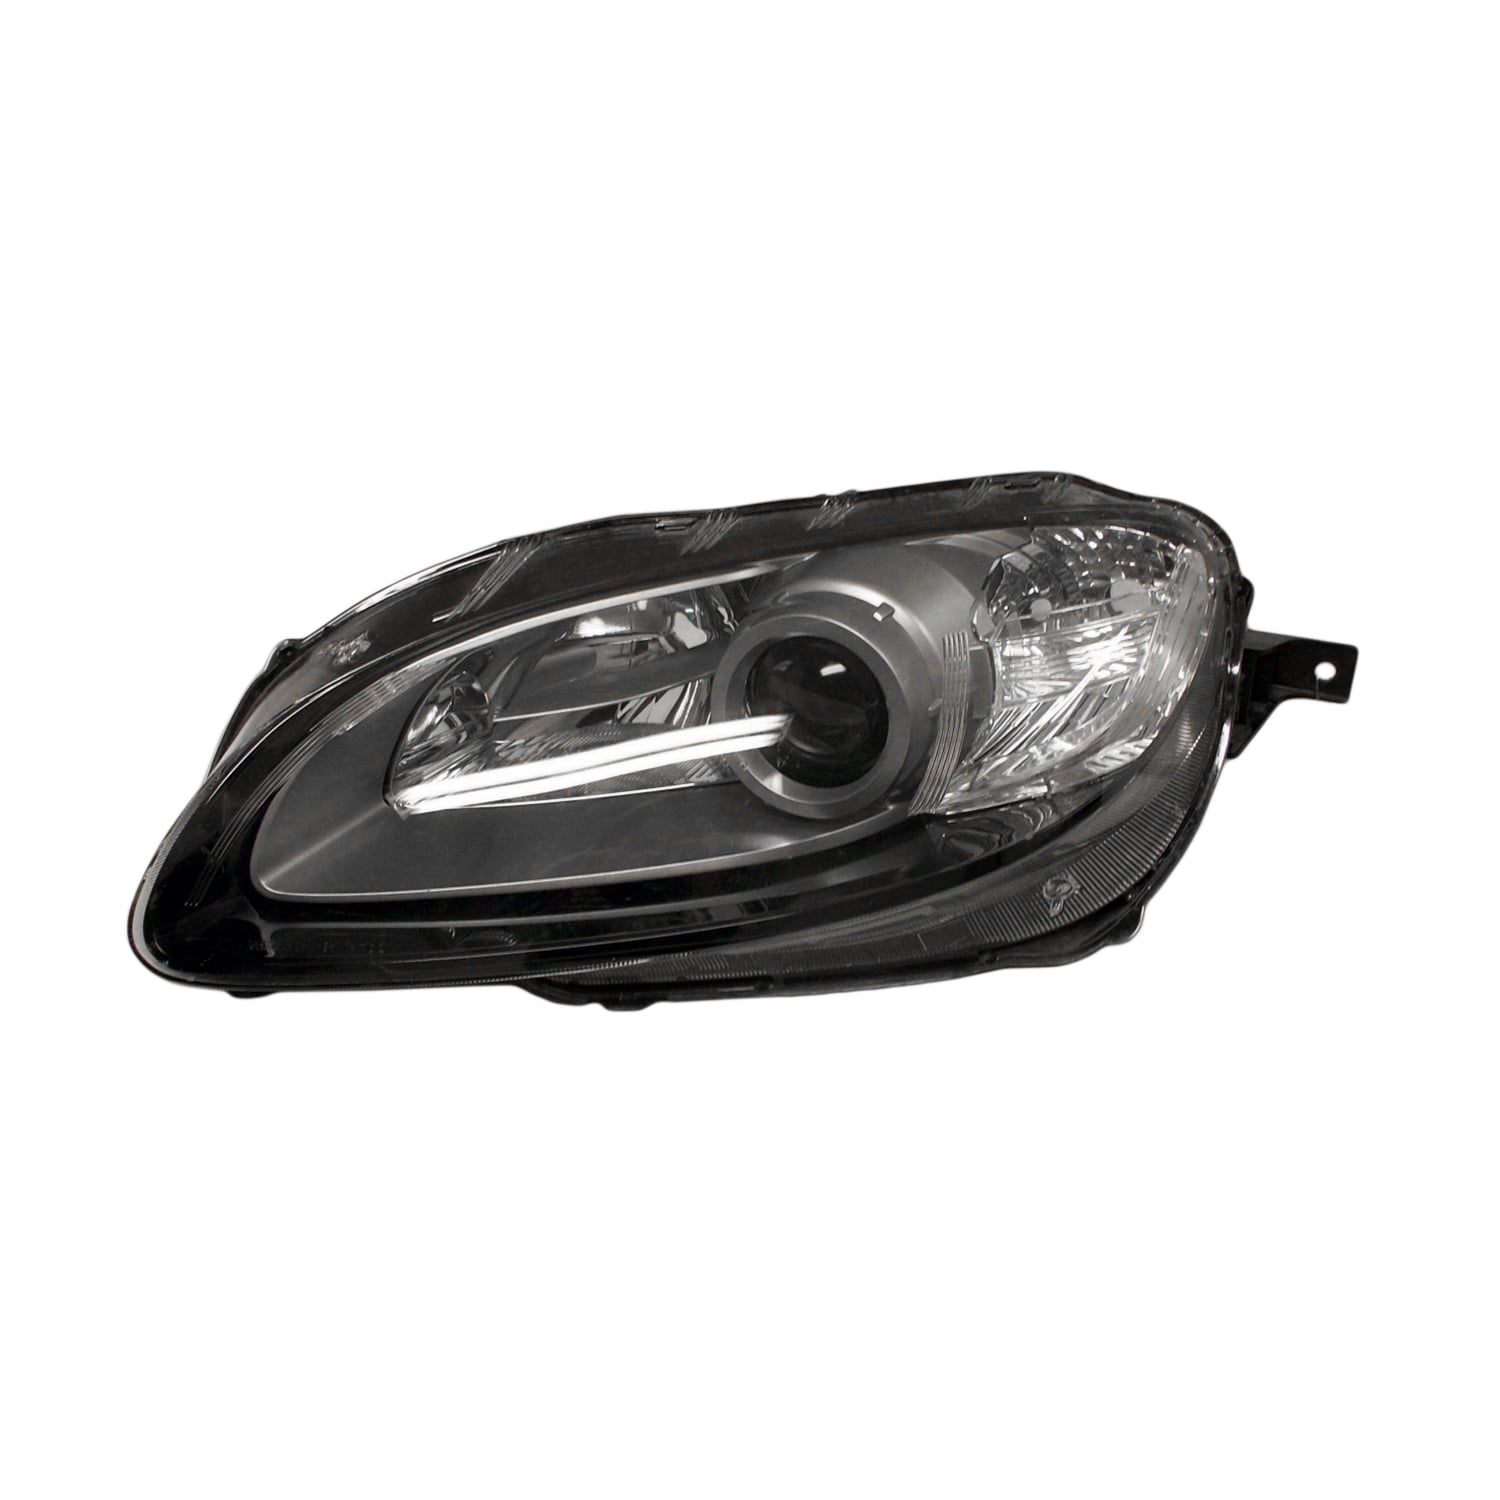 Right Side Headlight Lens Replacement Cover Fit For Mazda 2 2009-2012